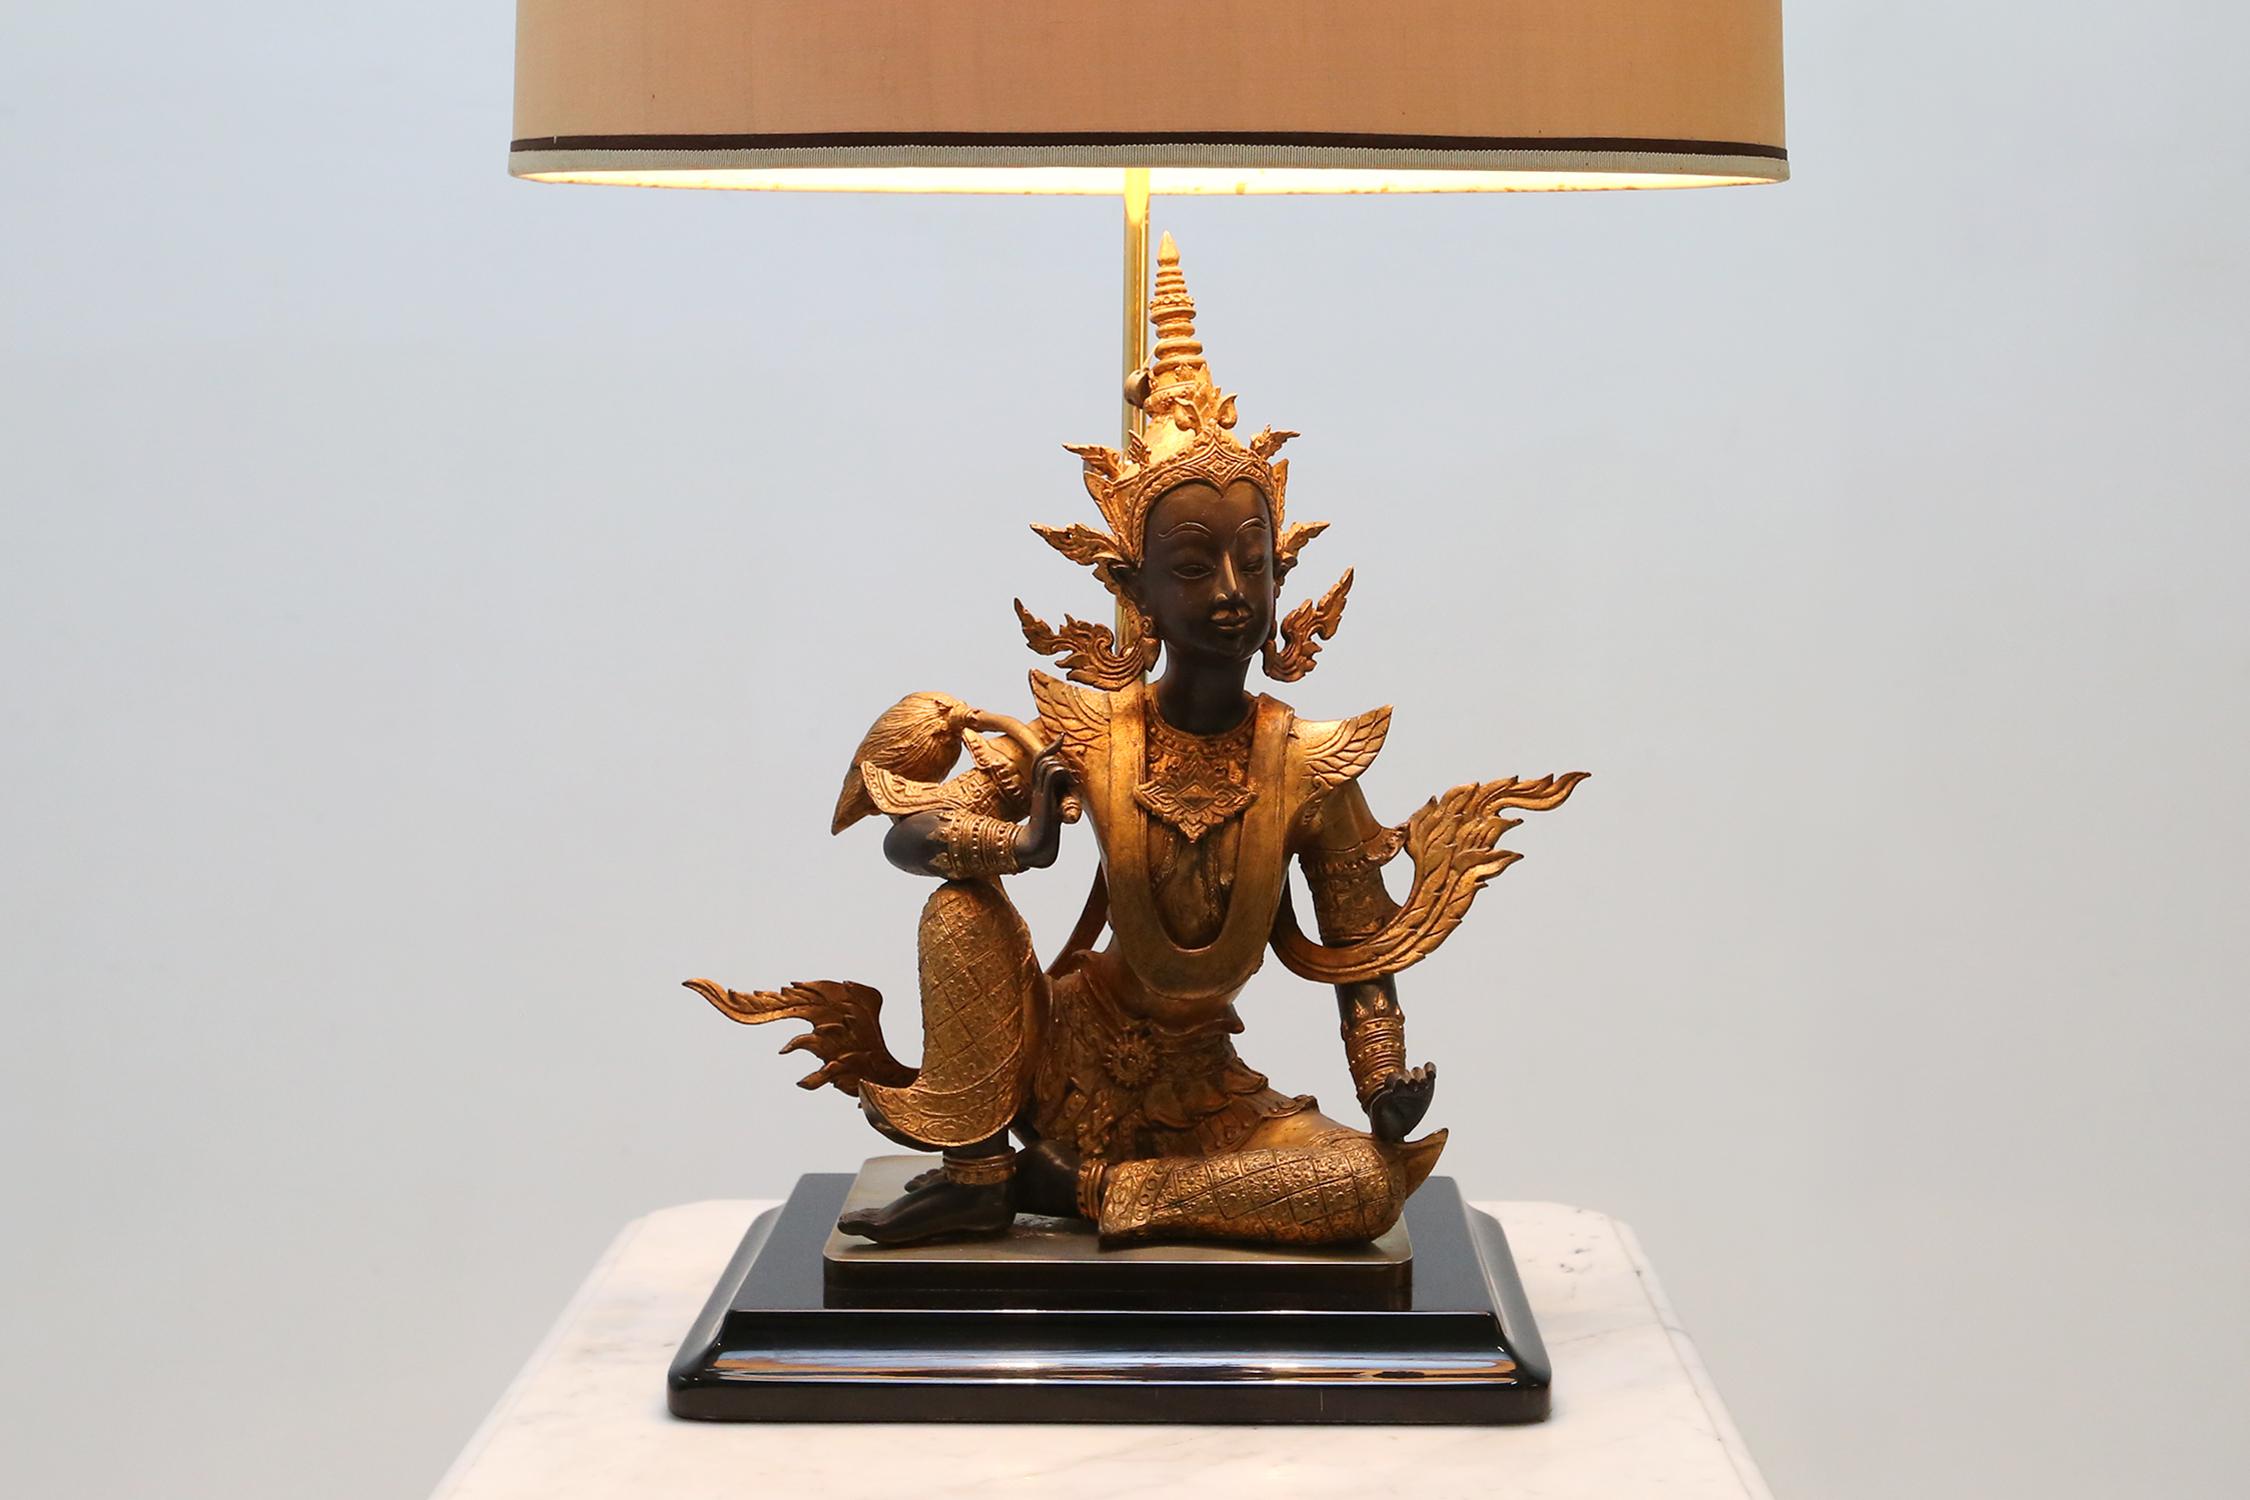 Gilded bronze seated Buddha table lamp of the Rattanakosin period.

The figure is made of gilded bronze and has some nice details in the clothing's and accessories.